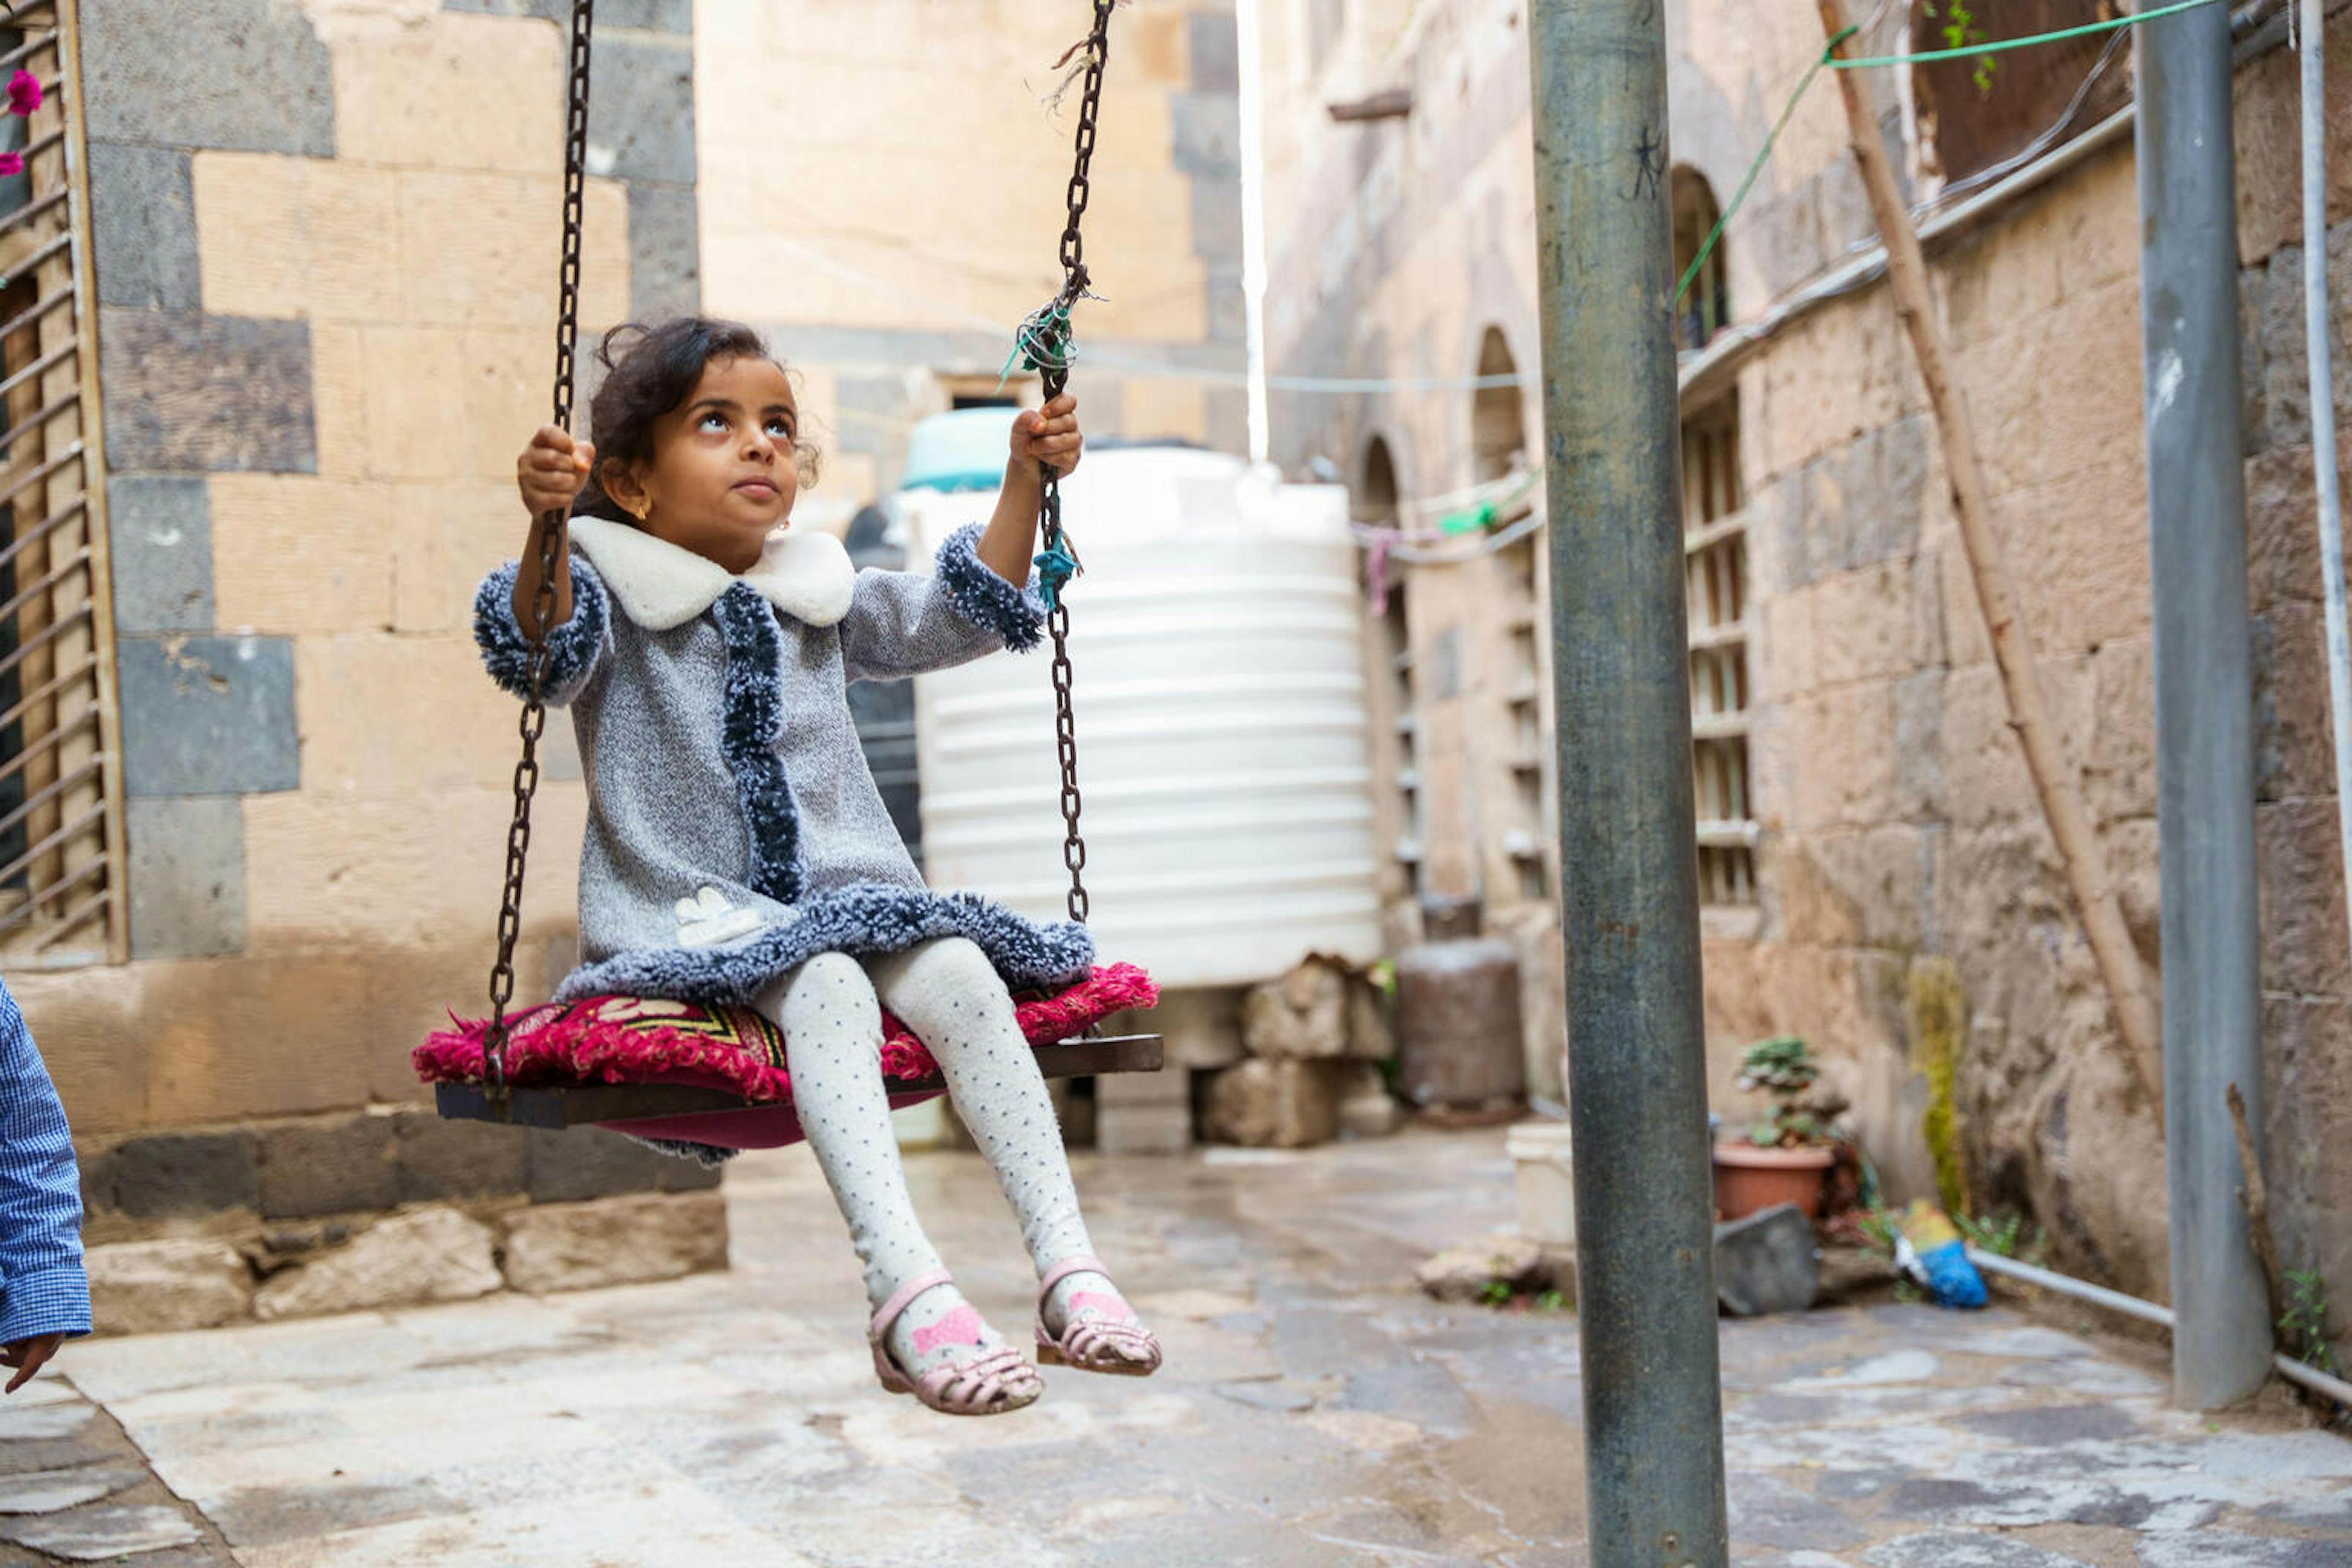 The 7-year-old daughter of Suroor Al-Shama’a swings in the front yard of their house in Dhamar Governorate, Yemen